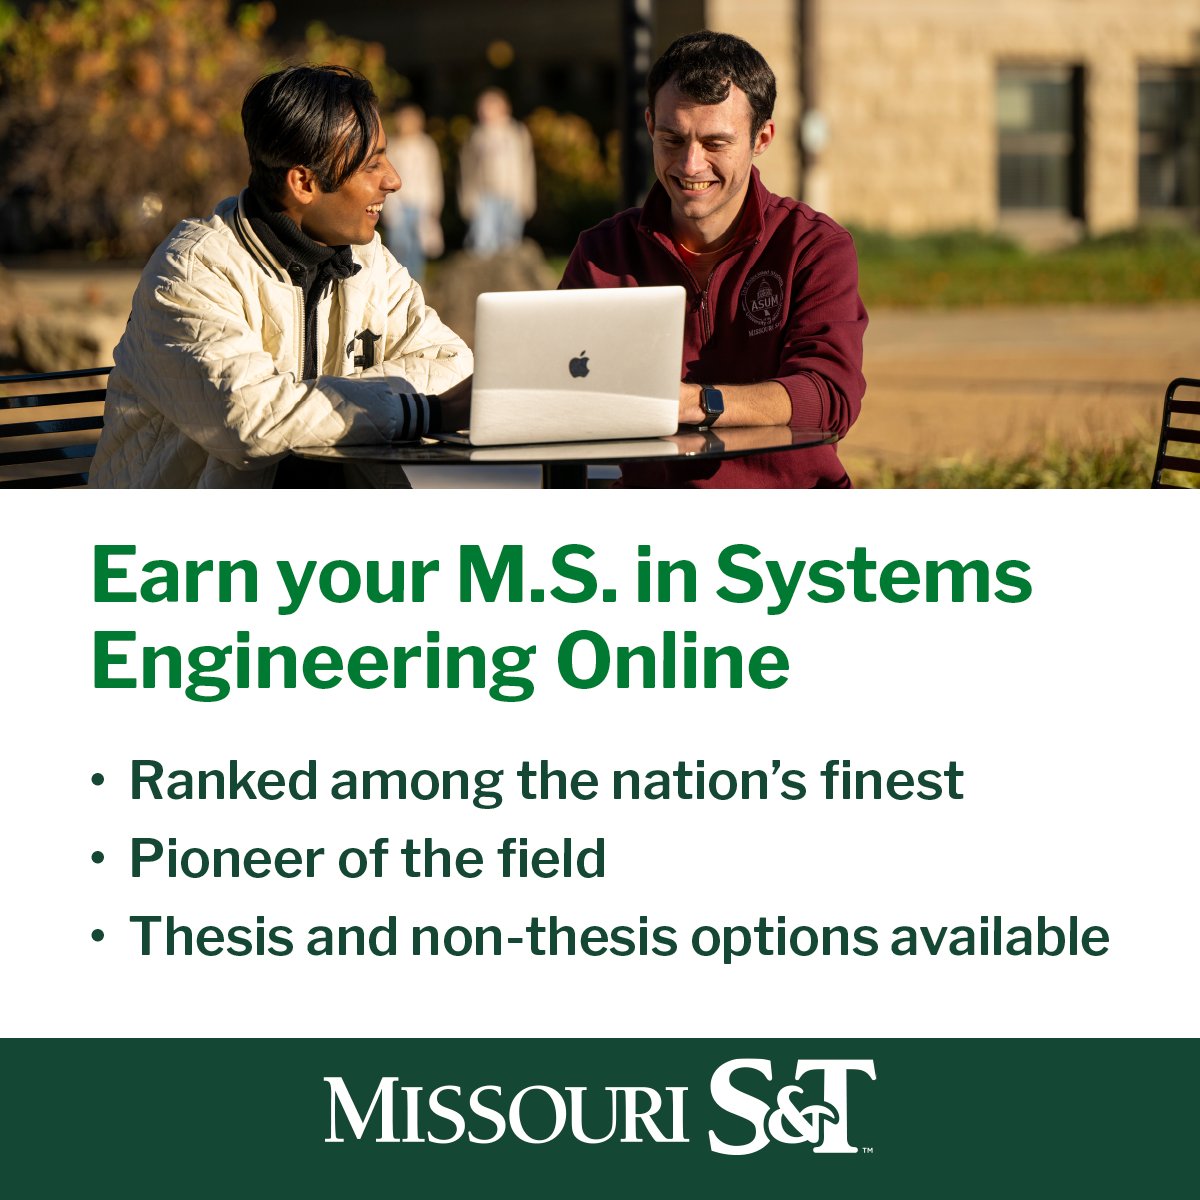 *Promoted* Discover the power of systems thinking with Missouri S&T's online master's degree in systems engineering. Explore a program designed for tomorrow's tech leaders. Learn more: distance.mst.edu/distance-progr… 🚀🌐
#SystemsEngineering #FutureLeaders